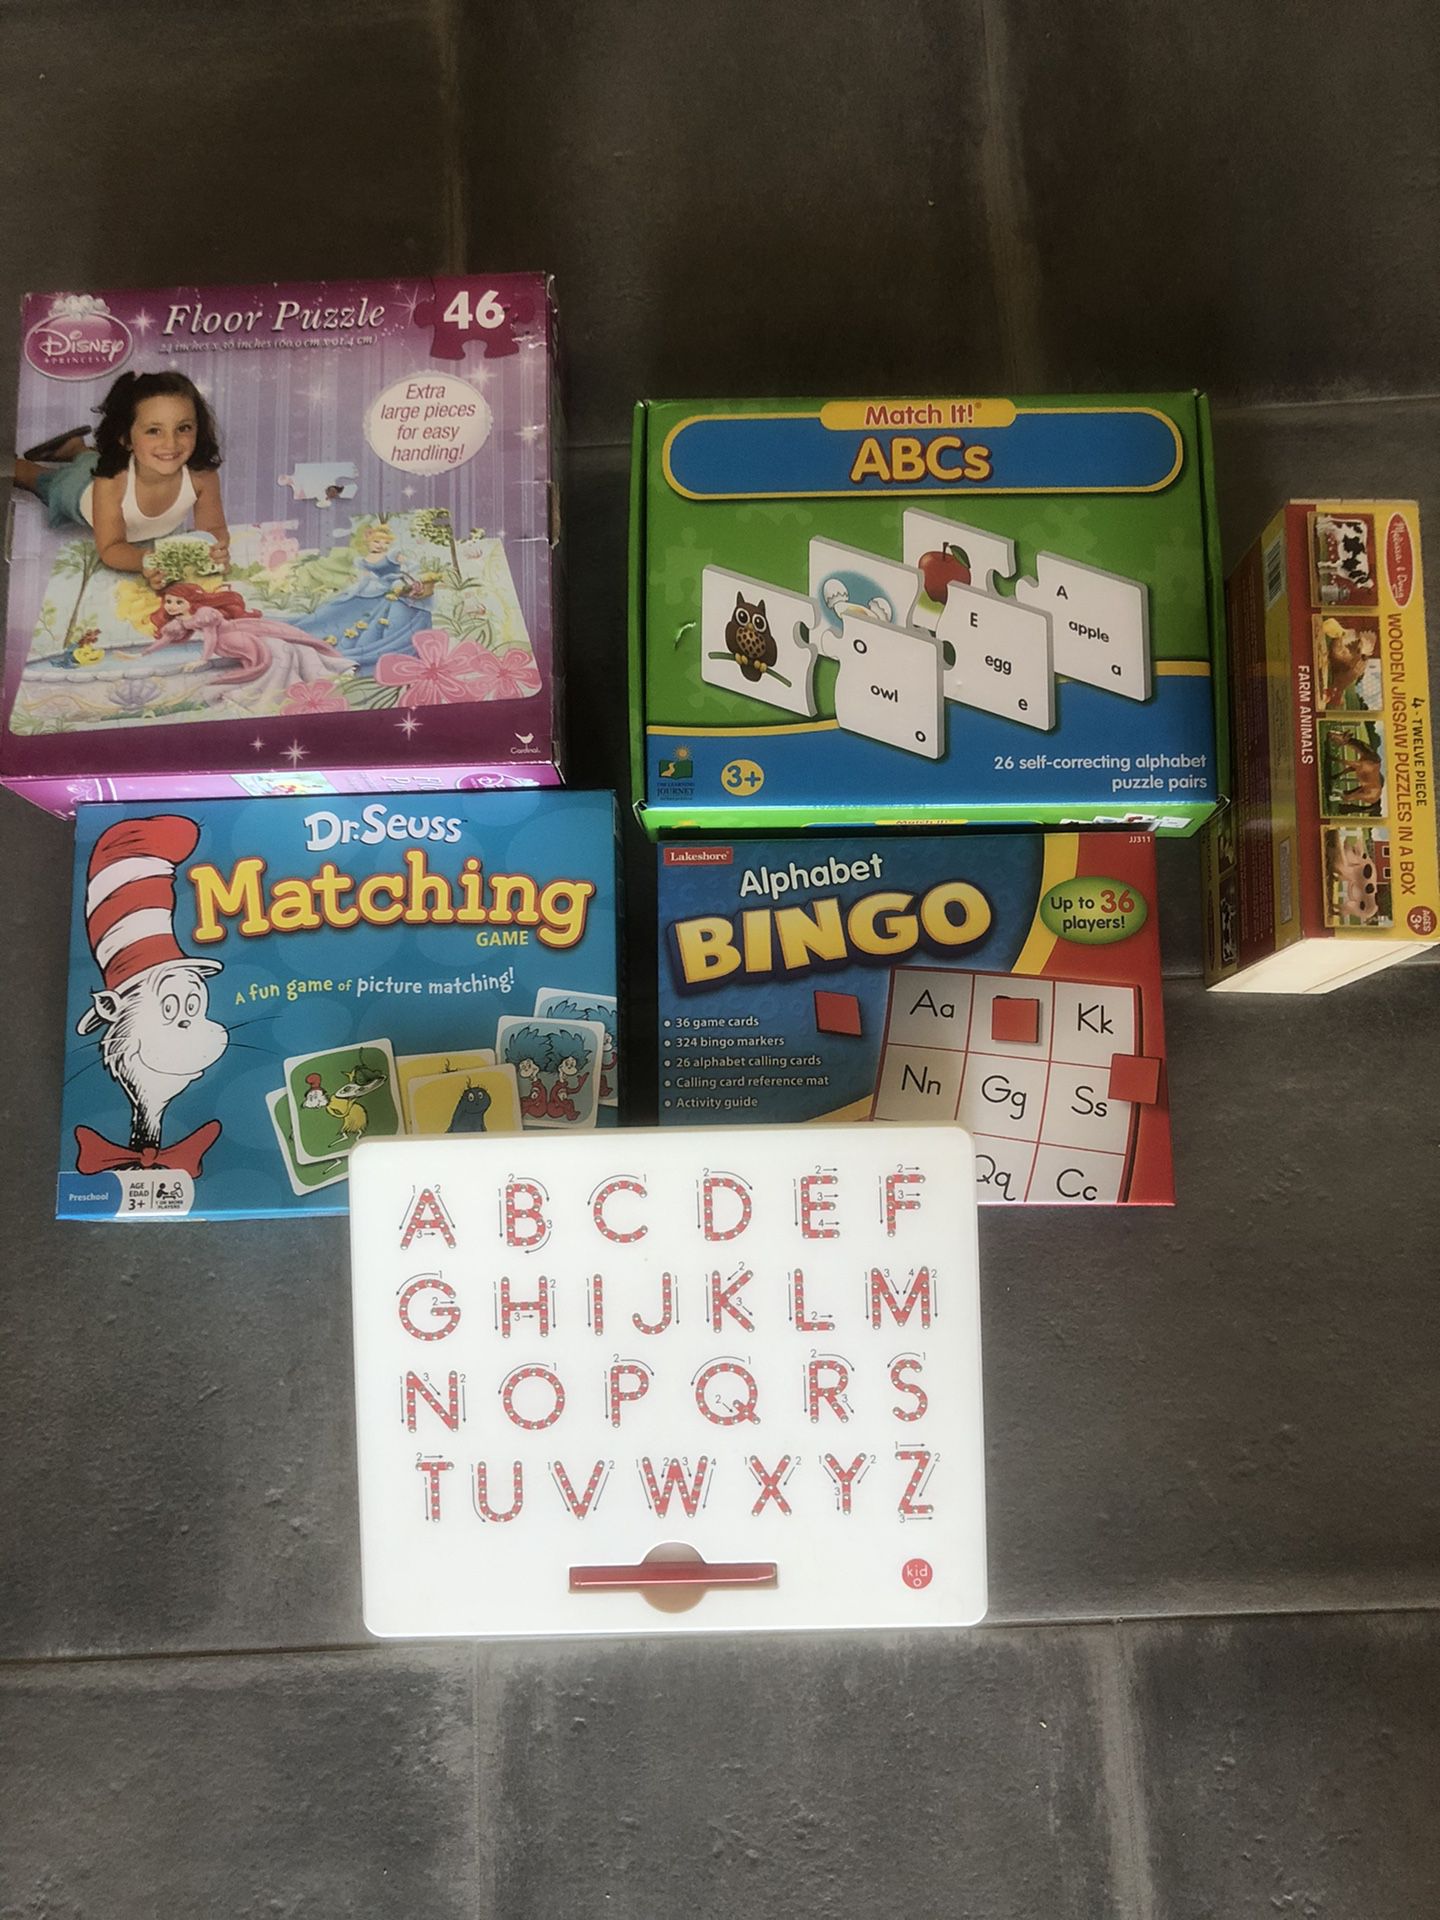 Pre-school leaning games and puzzles